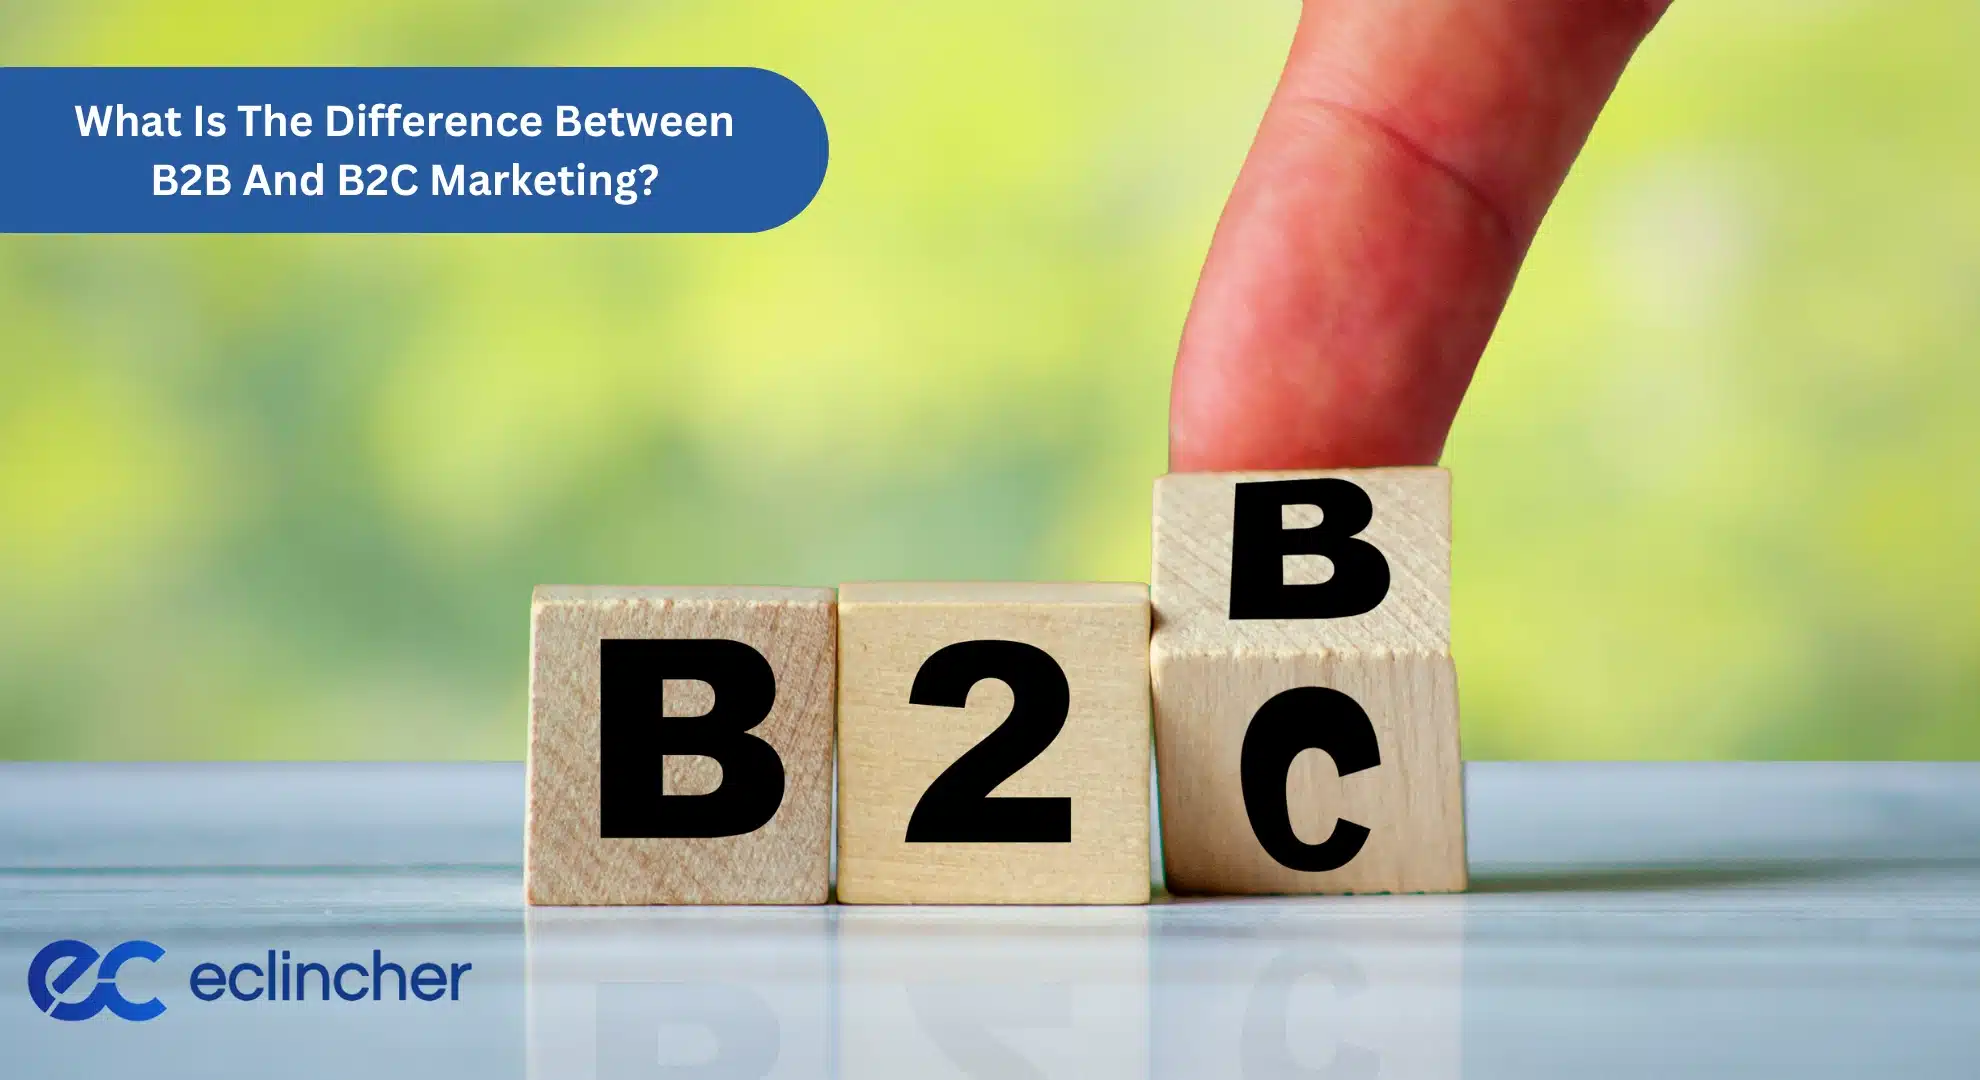 What Is The Difference Between B2B And B2C Marketing